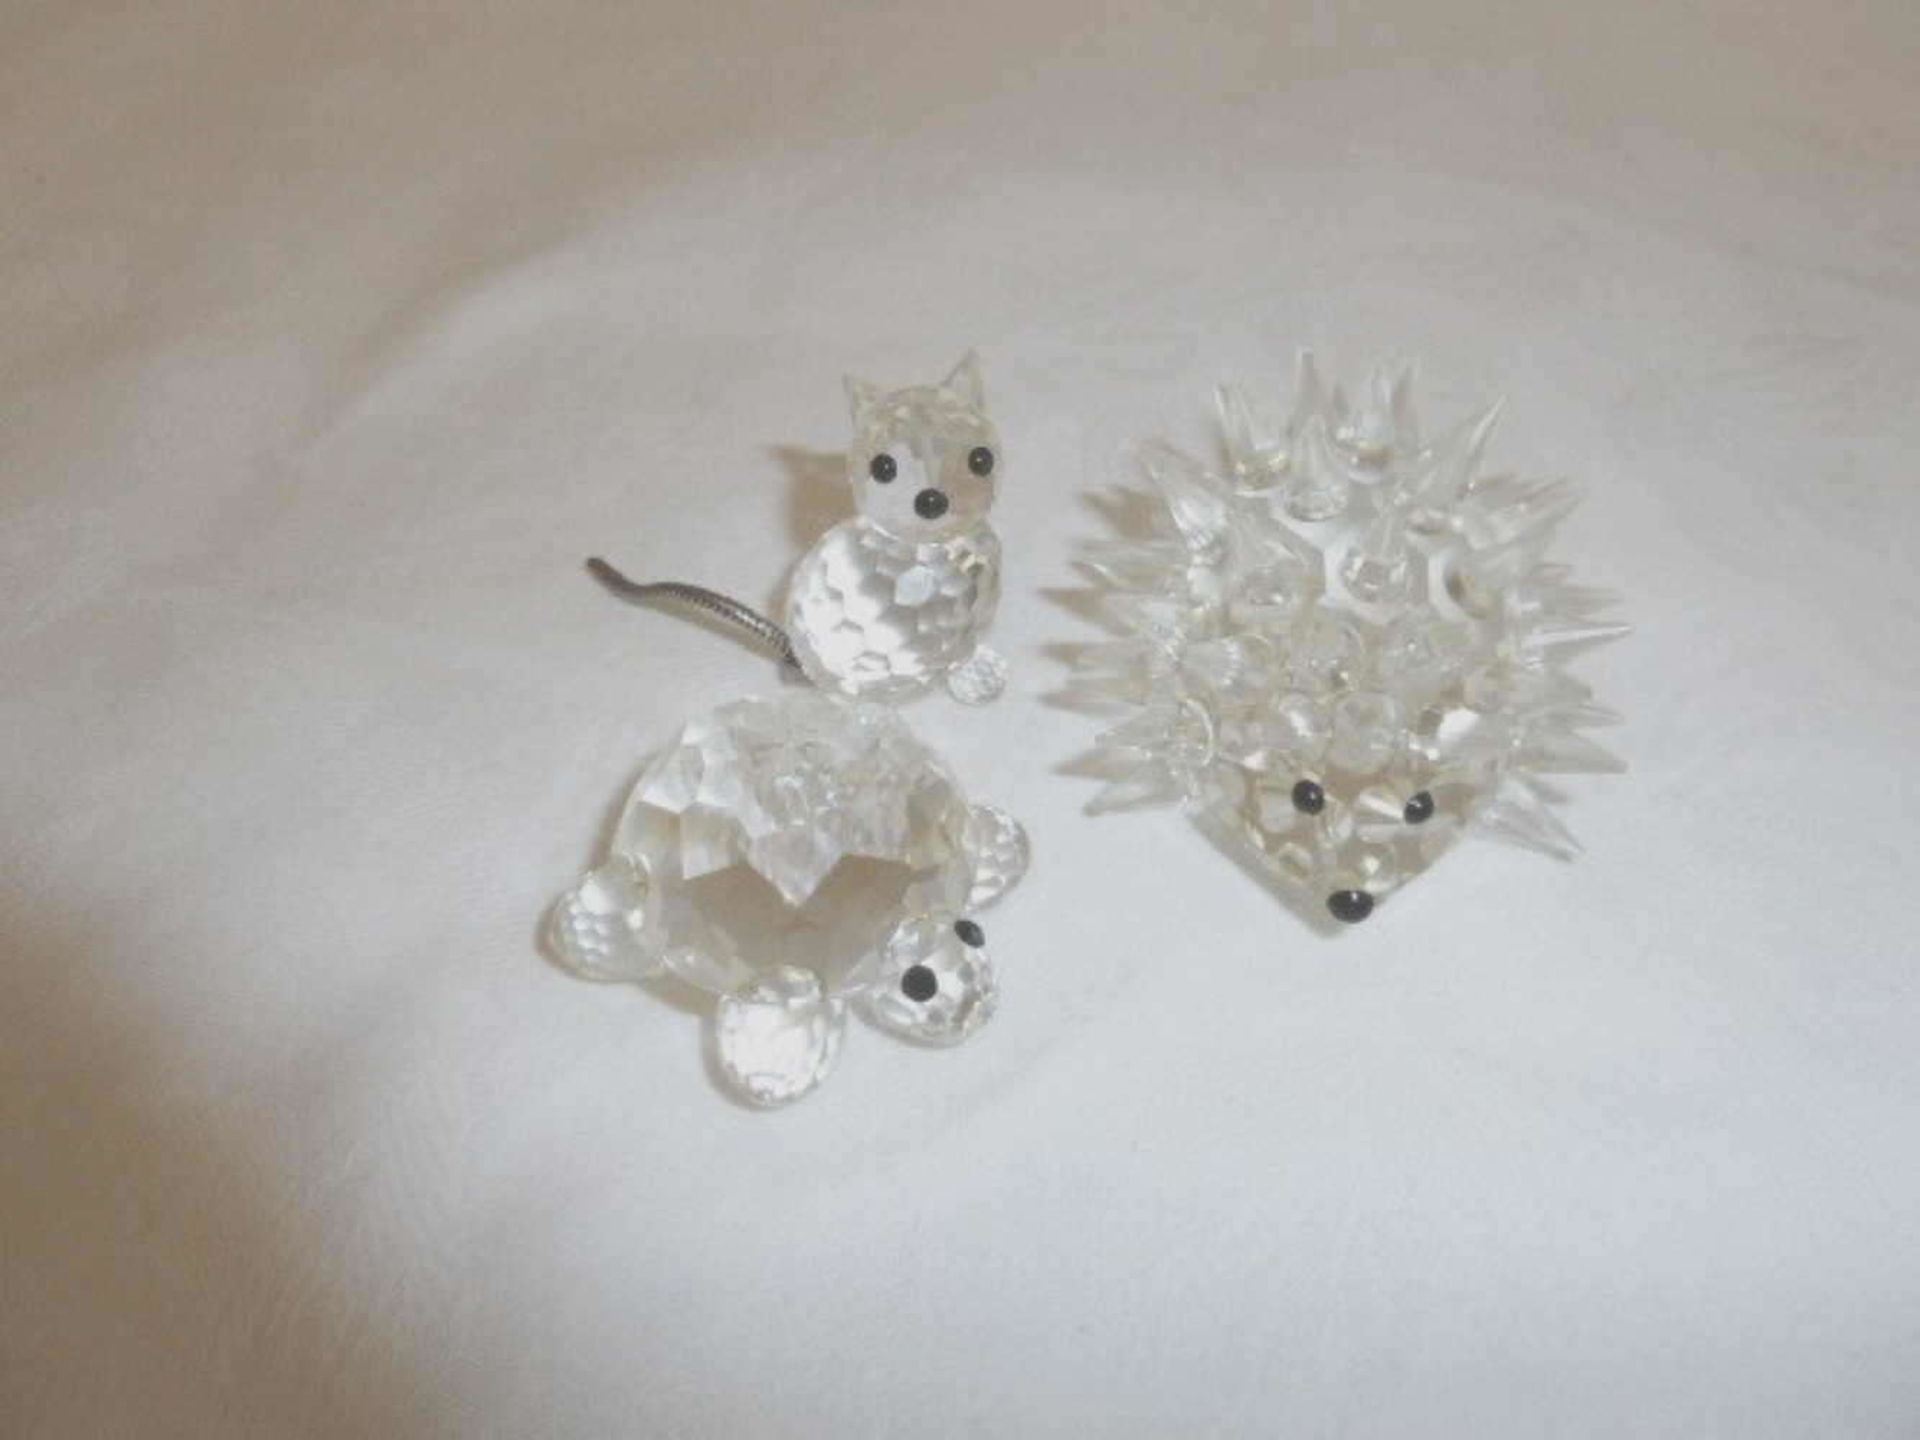 3 crystal glass animal figures, 1 hedgehog, 1 turtle, and 1 cat. Partly the tips with chip.